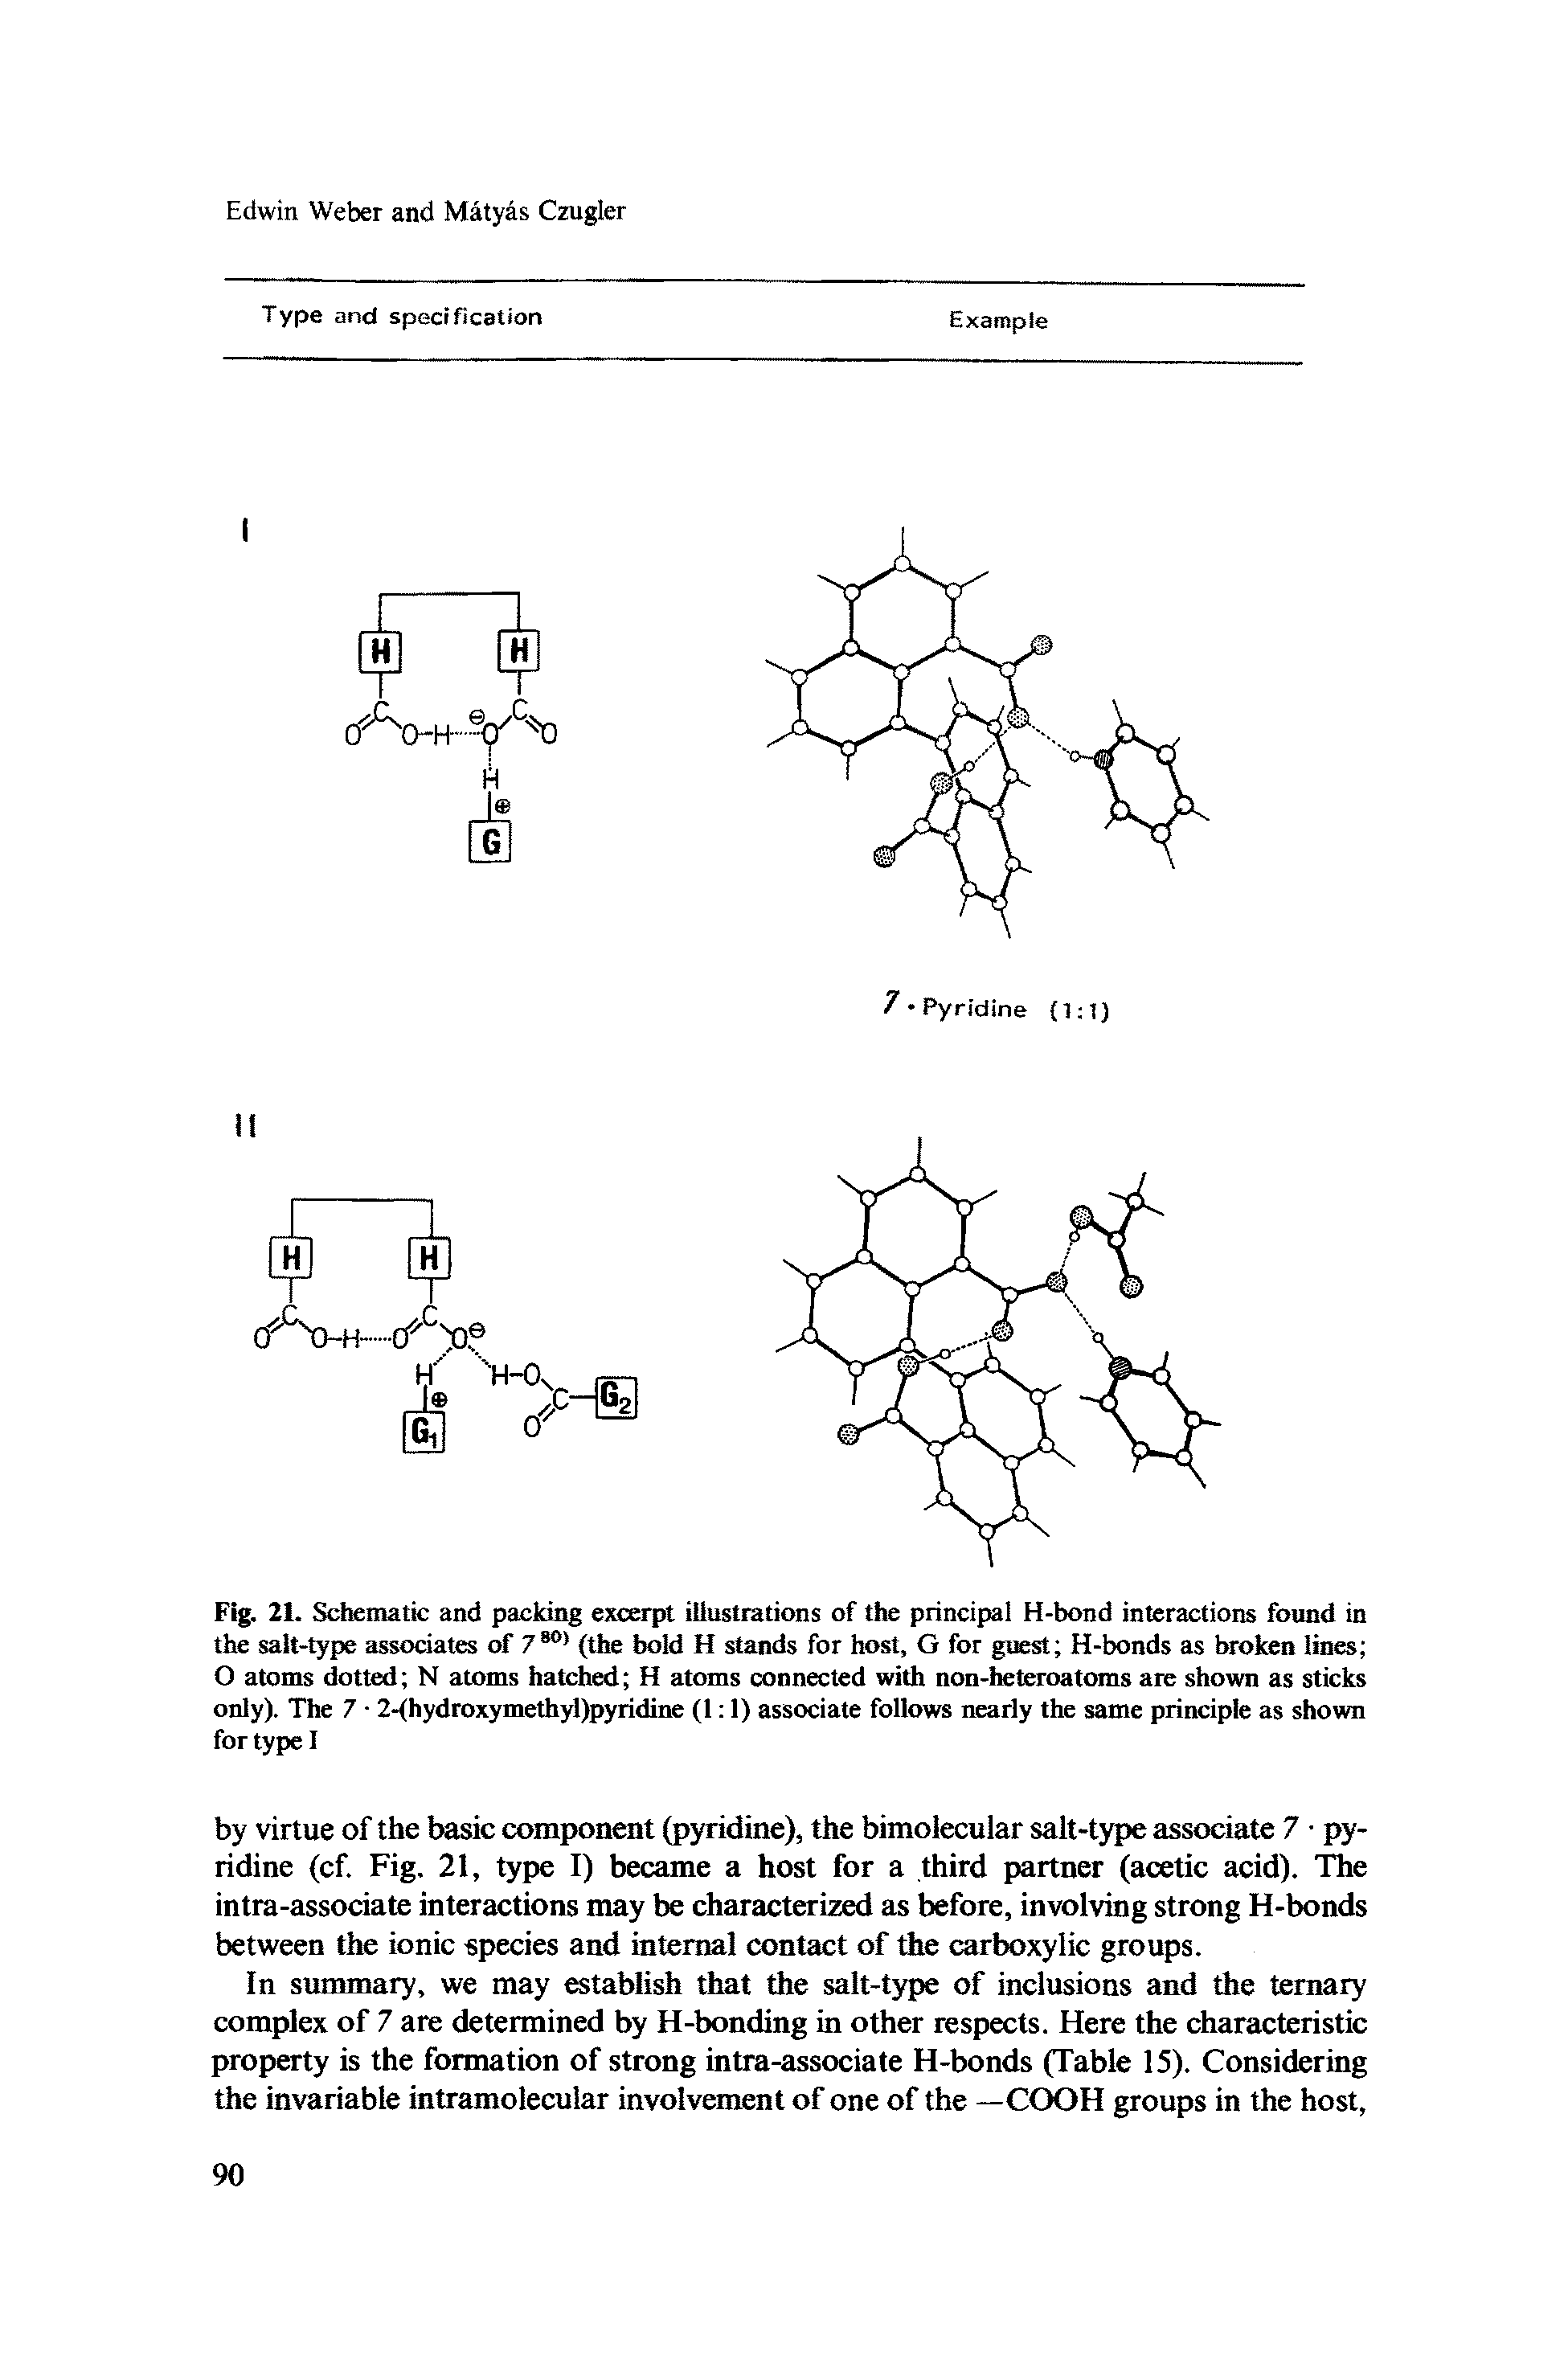 Fig. 21. Schematic and packing excerpt illustrations of the principal H-bond interactions found in the salt-type associates of 7B0> (the bold H stands for host, G for guest H-bonds as broken lines O atoms dotted N atoms hatched H atoms connected with non-heteroatoms are shown as sticks only). The 7 2-(hydroxymethyl)pyridine (1 1) associate follows nearly the same principle as shown for type I...